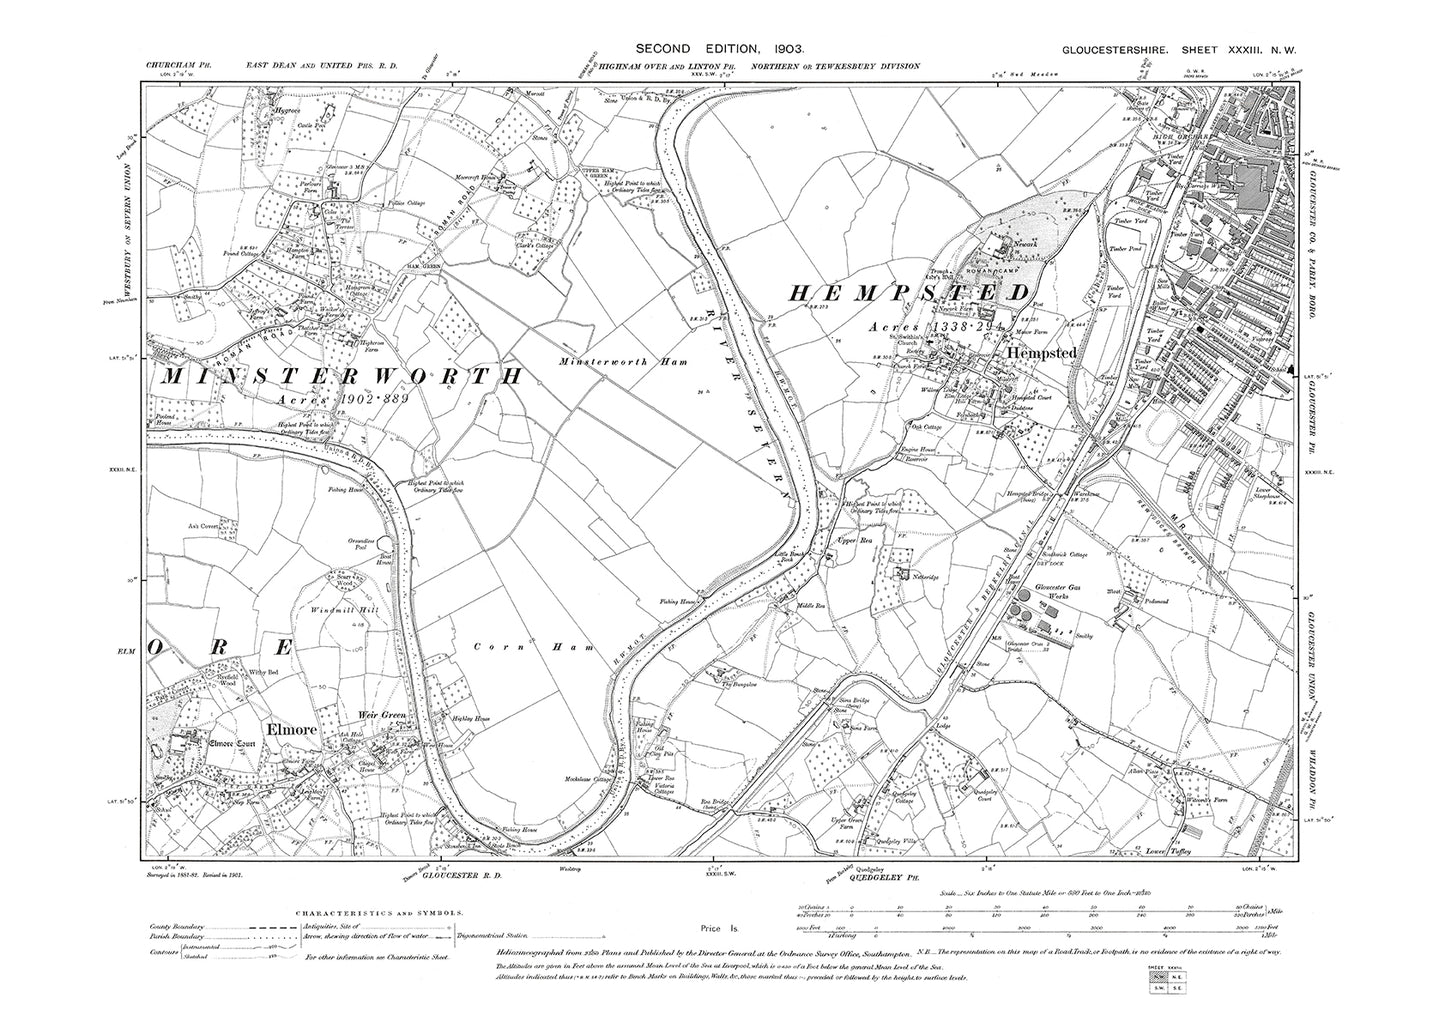 Old OS map dated 1903, showing Gloucester (southwest), Hempsted, Minsterworth, Elmore in Gloucestershire - 33NW